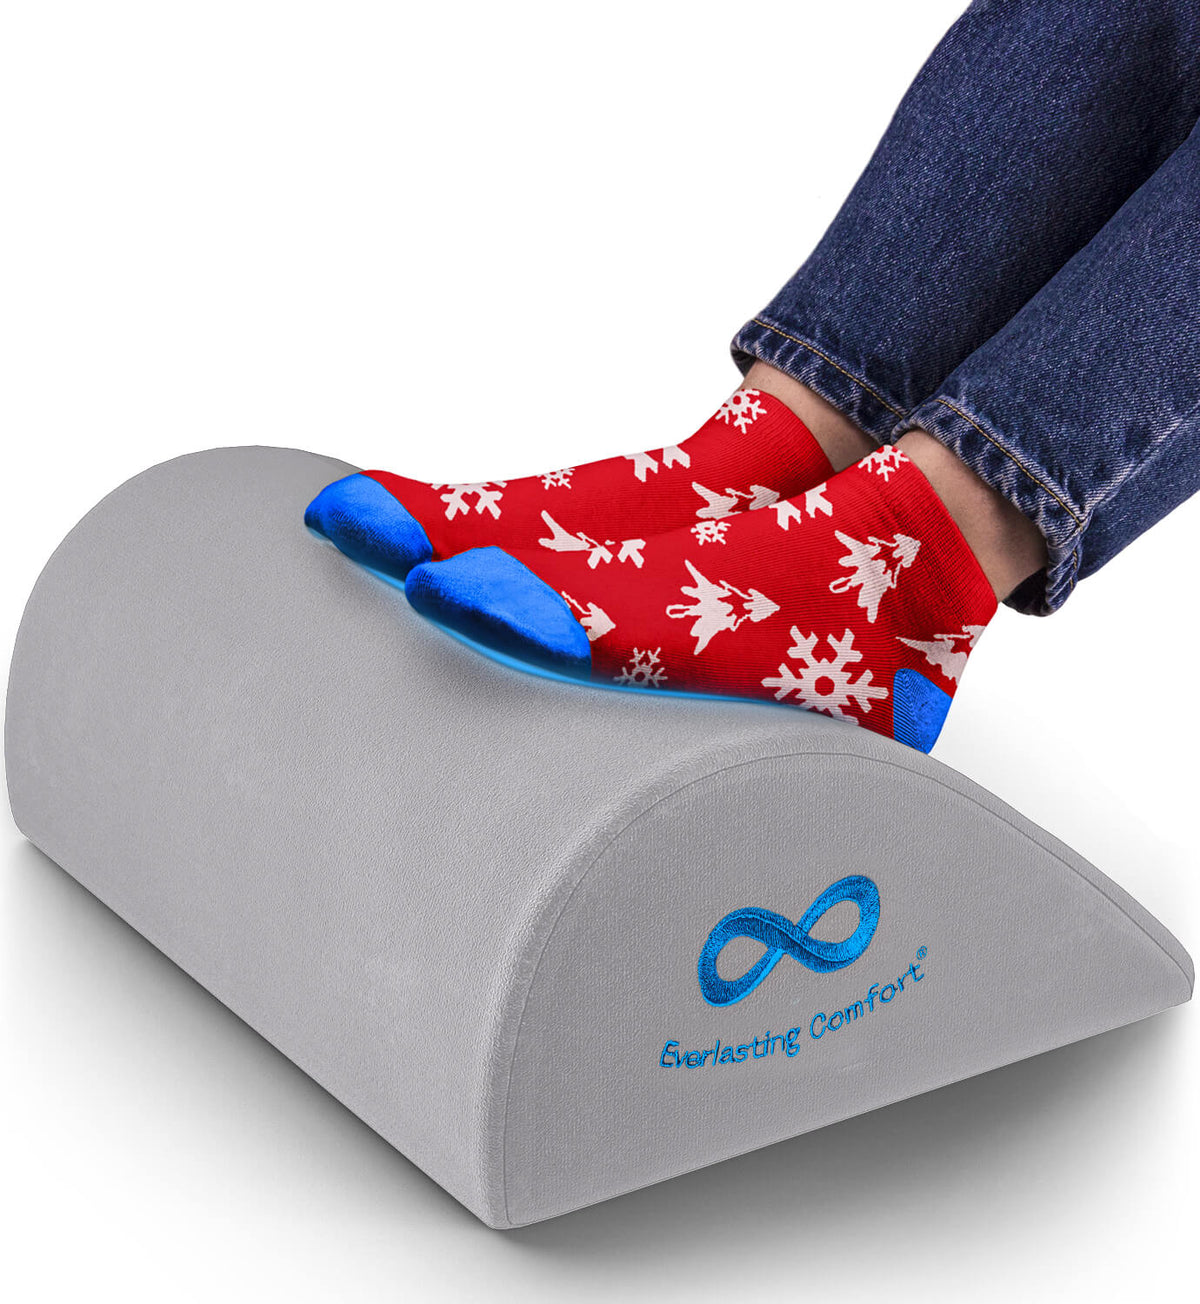 Everlasting Comfort Foot Rest for Under Desk - Kick Up Your Feet, Improve Circulation - Work from Home Memory Foam Footrest Pillow - Foot Stool for